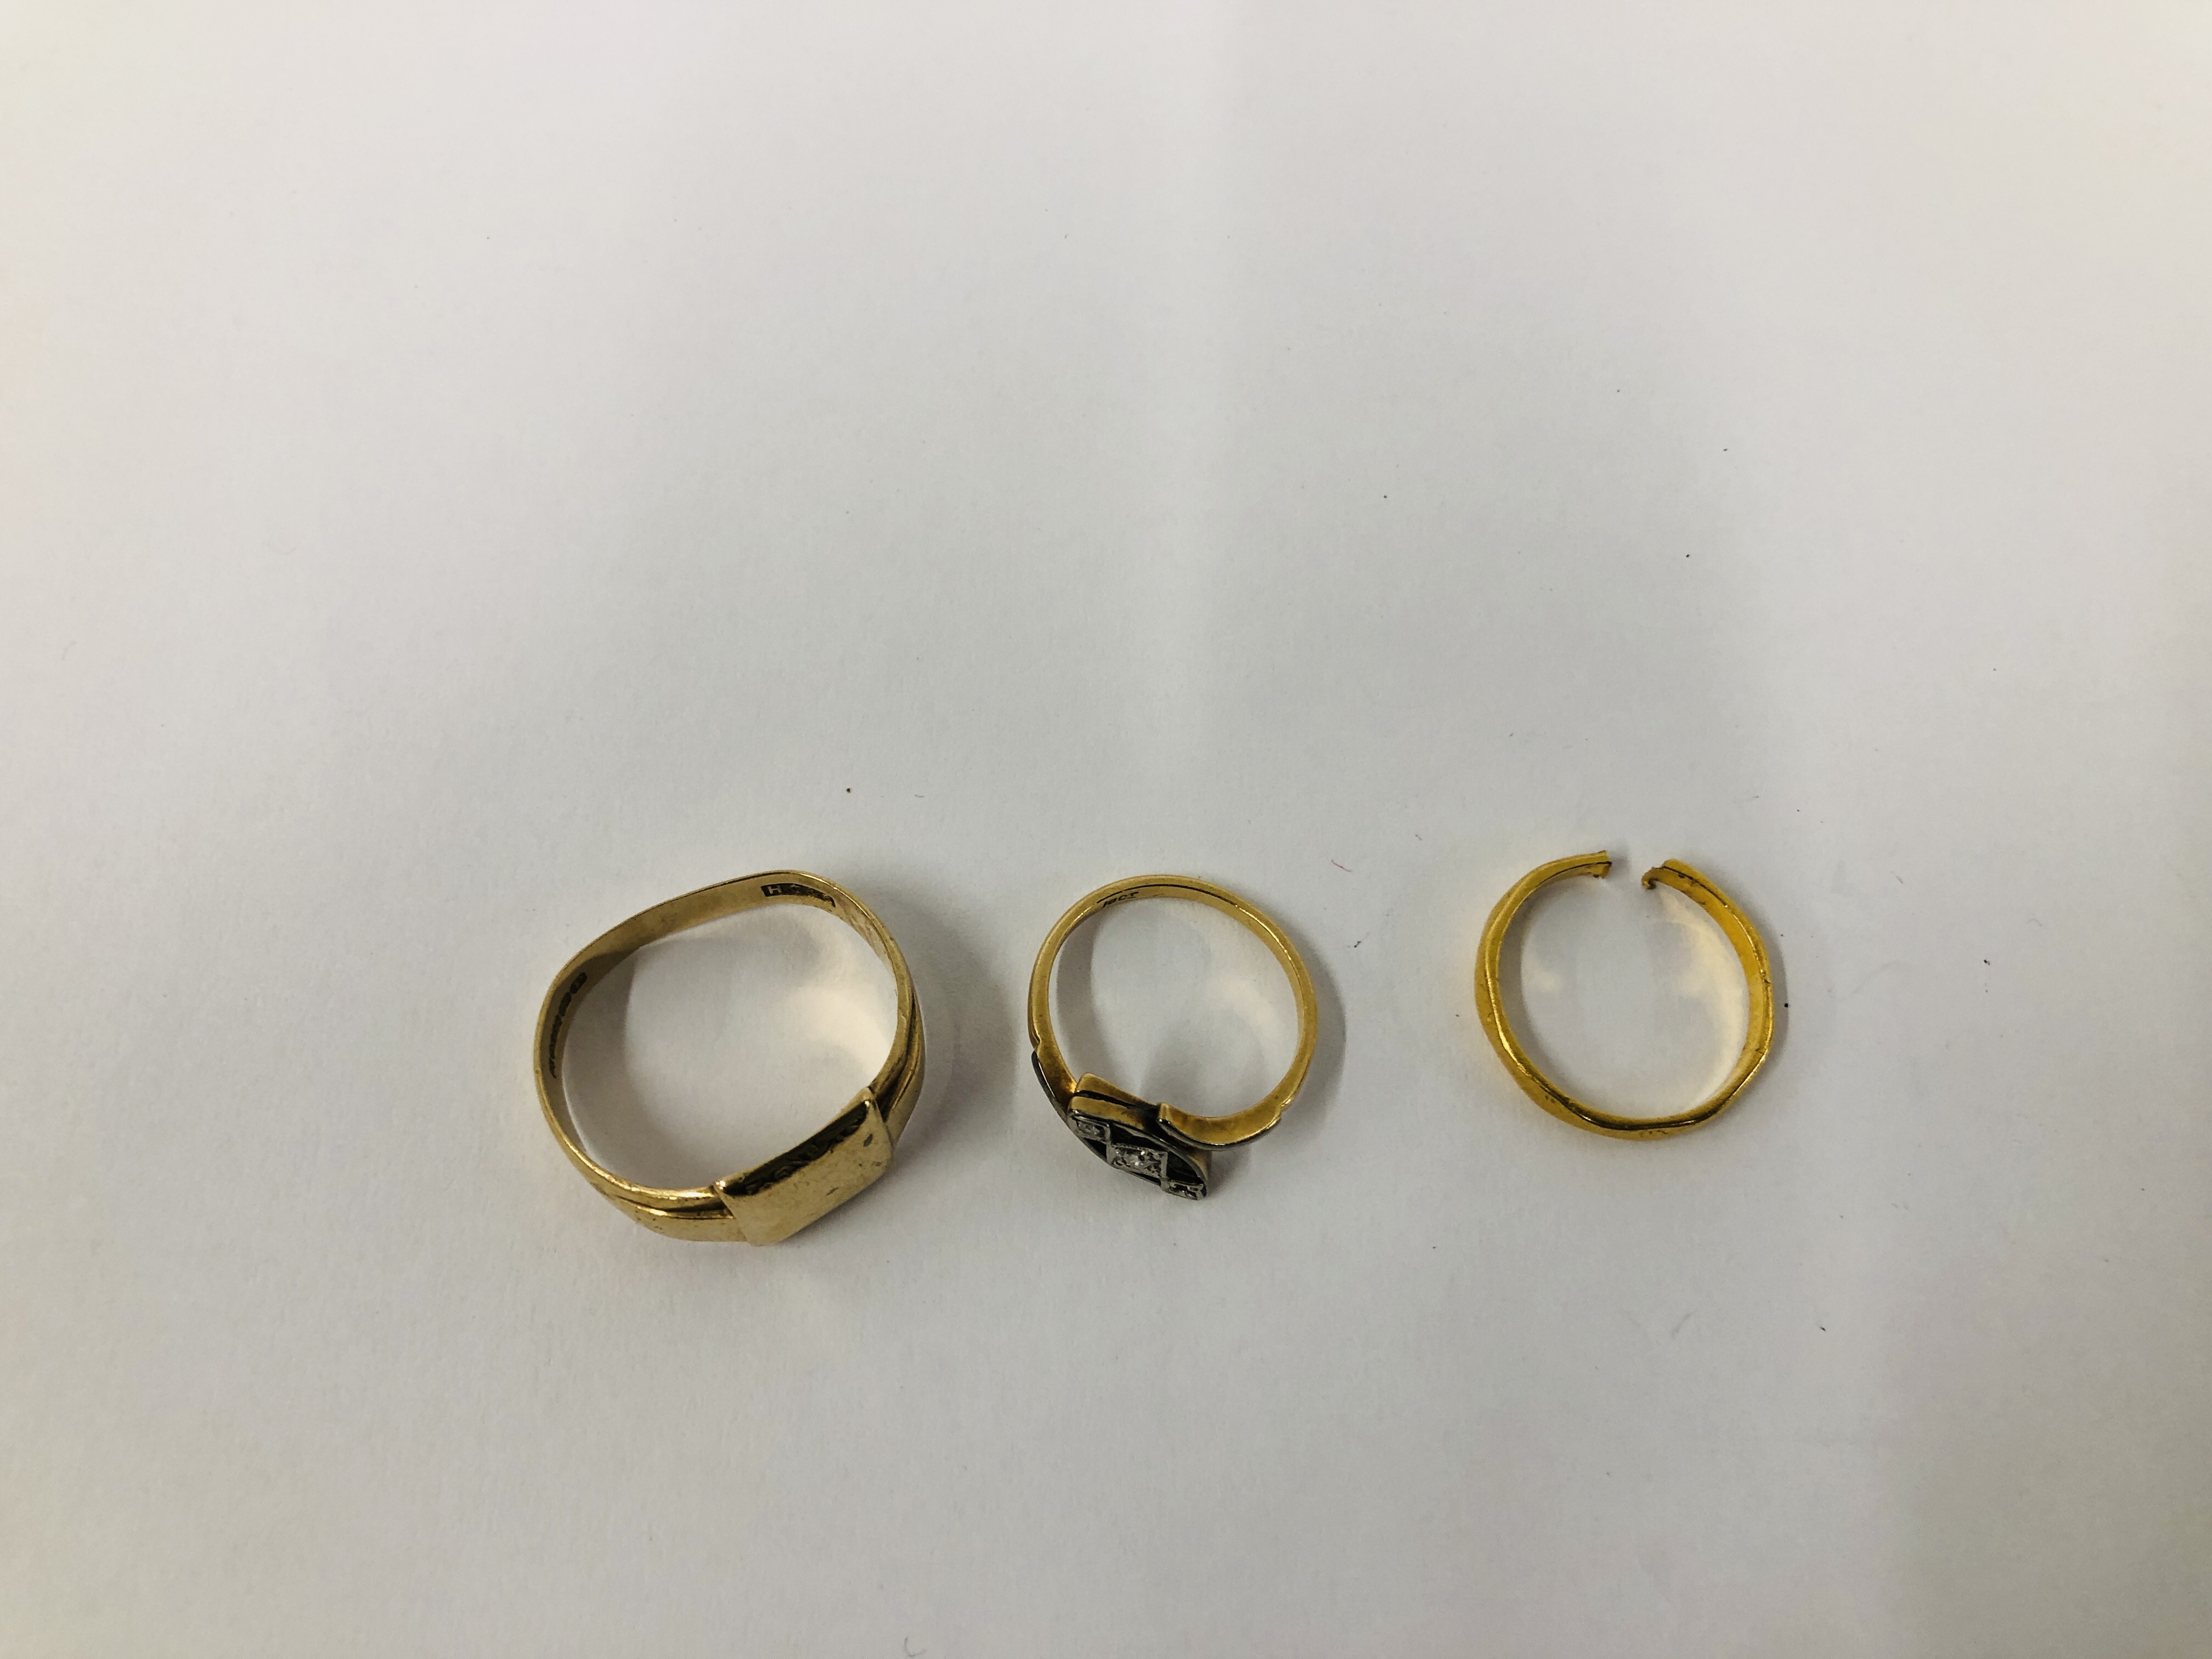 AN 18CT. GOLD THREE STONE DIAMOND TWIST RING (ONE STONE MISSING) ALONG WITH A 22CT. - Image 5 of 8